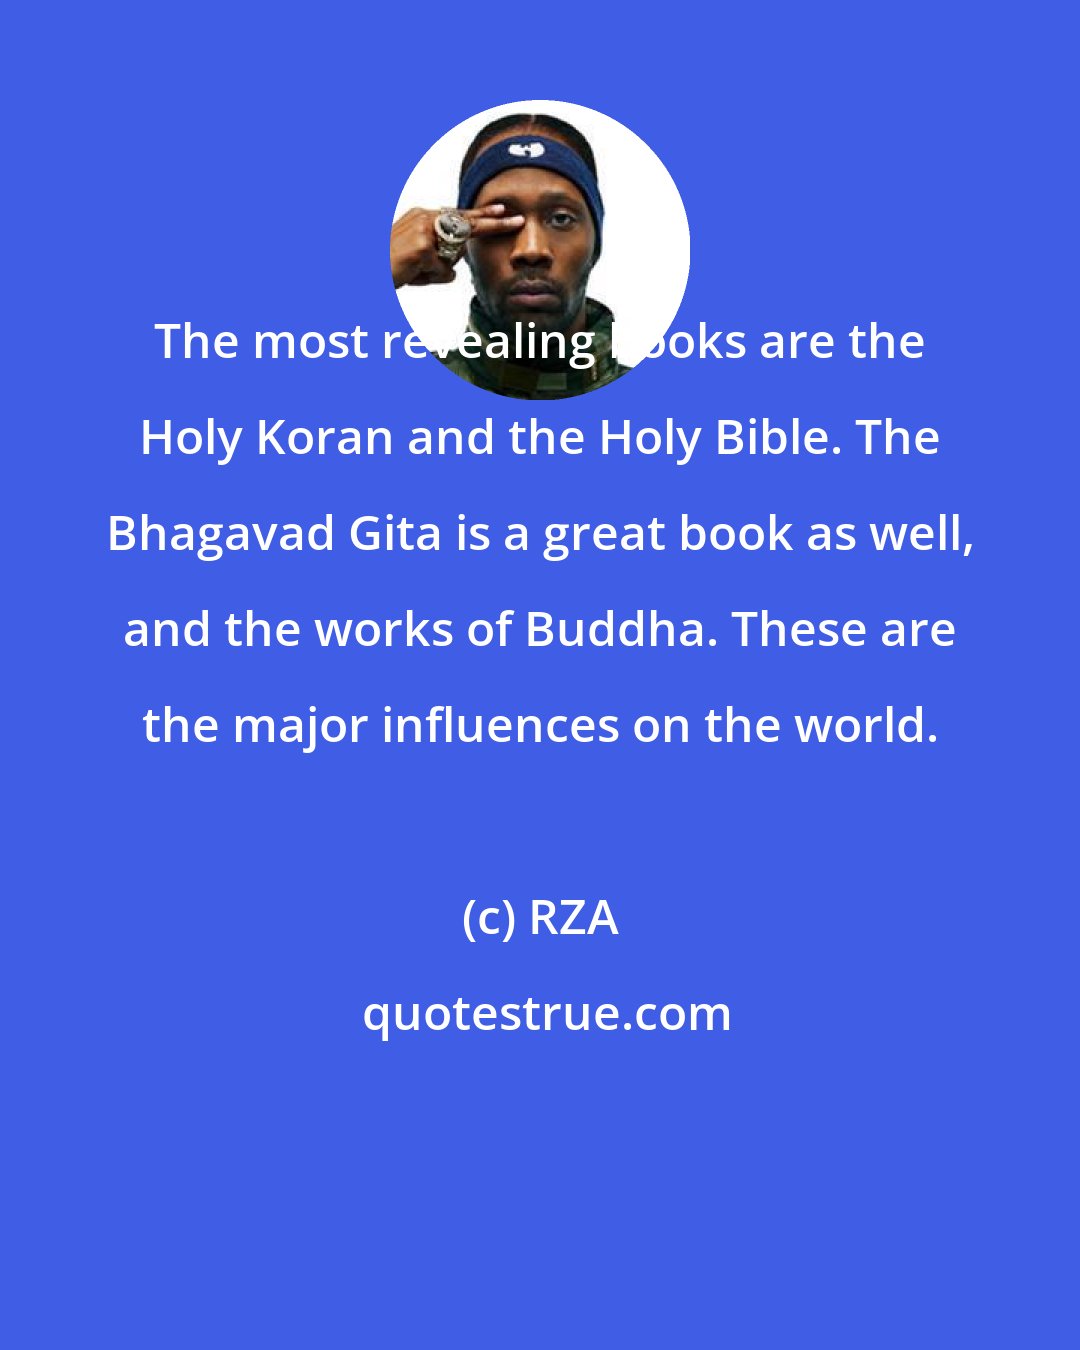 RZA: The most revealing books are the Holy Koran and the Holy Bible. The Bhagavad Gita is a great book as well, and the works of Buddha. These are the major influences on the world.